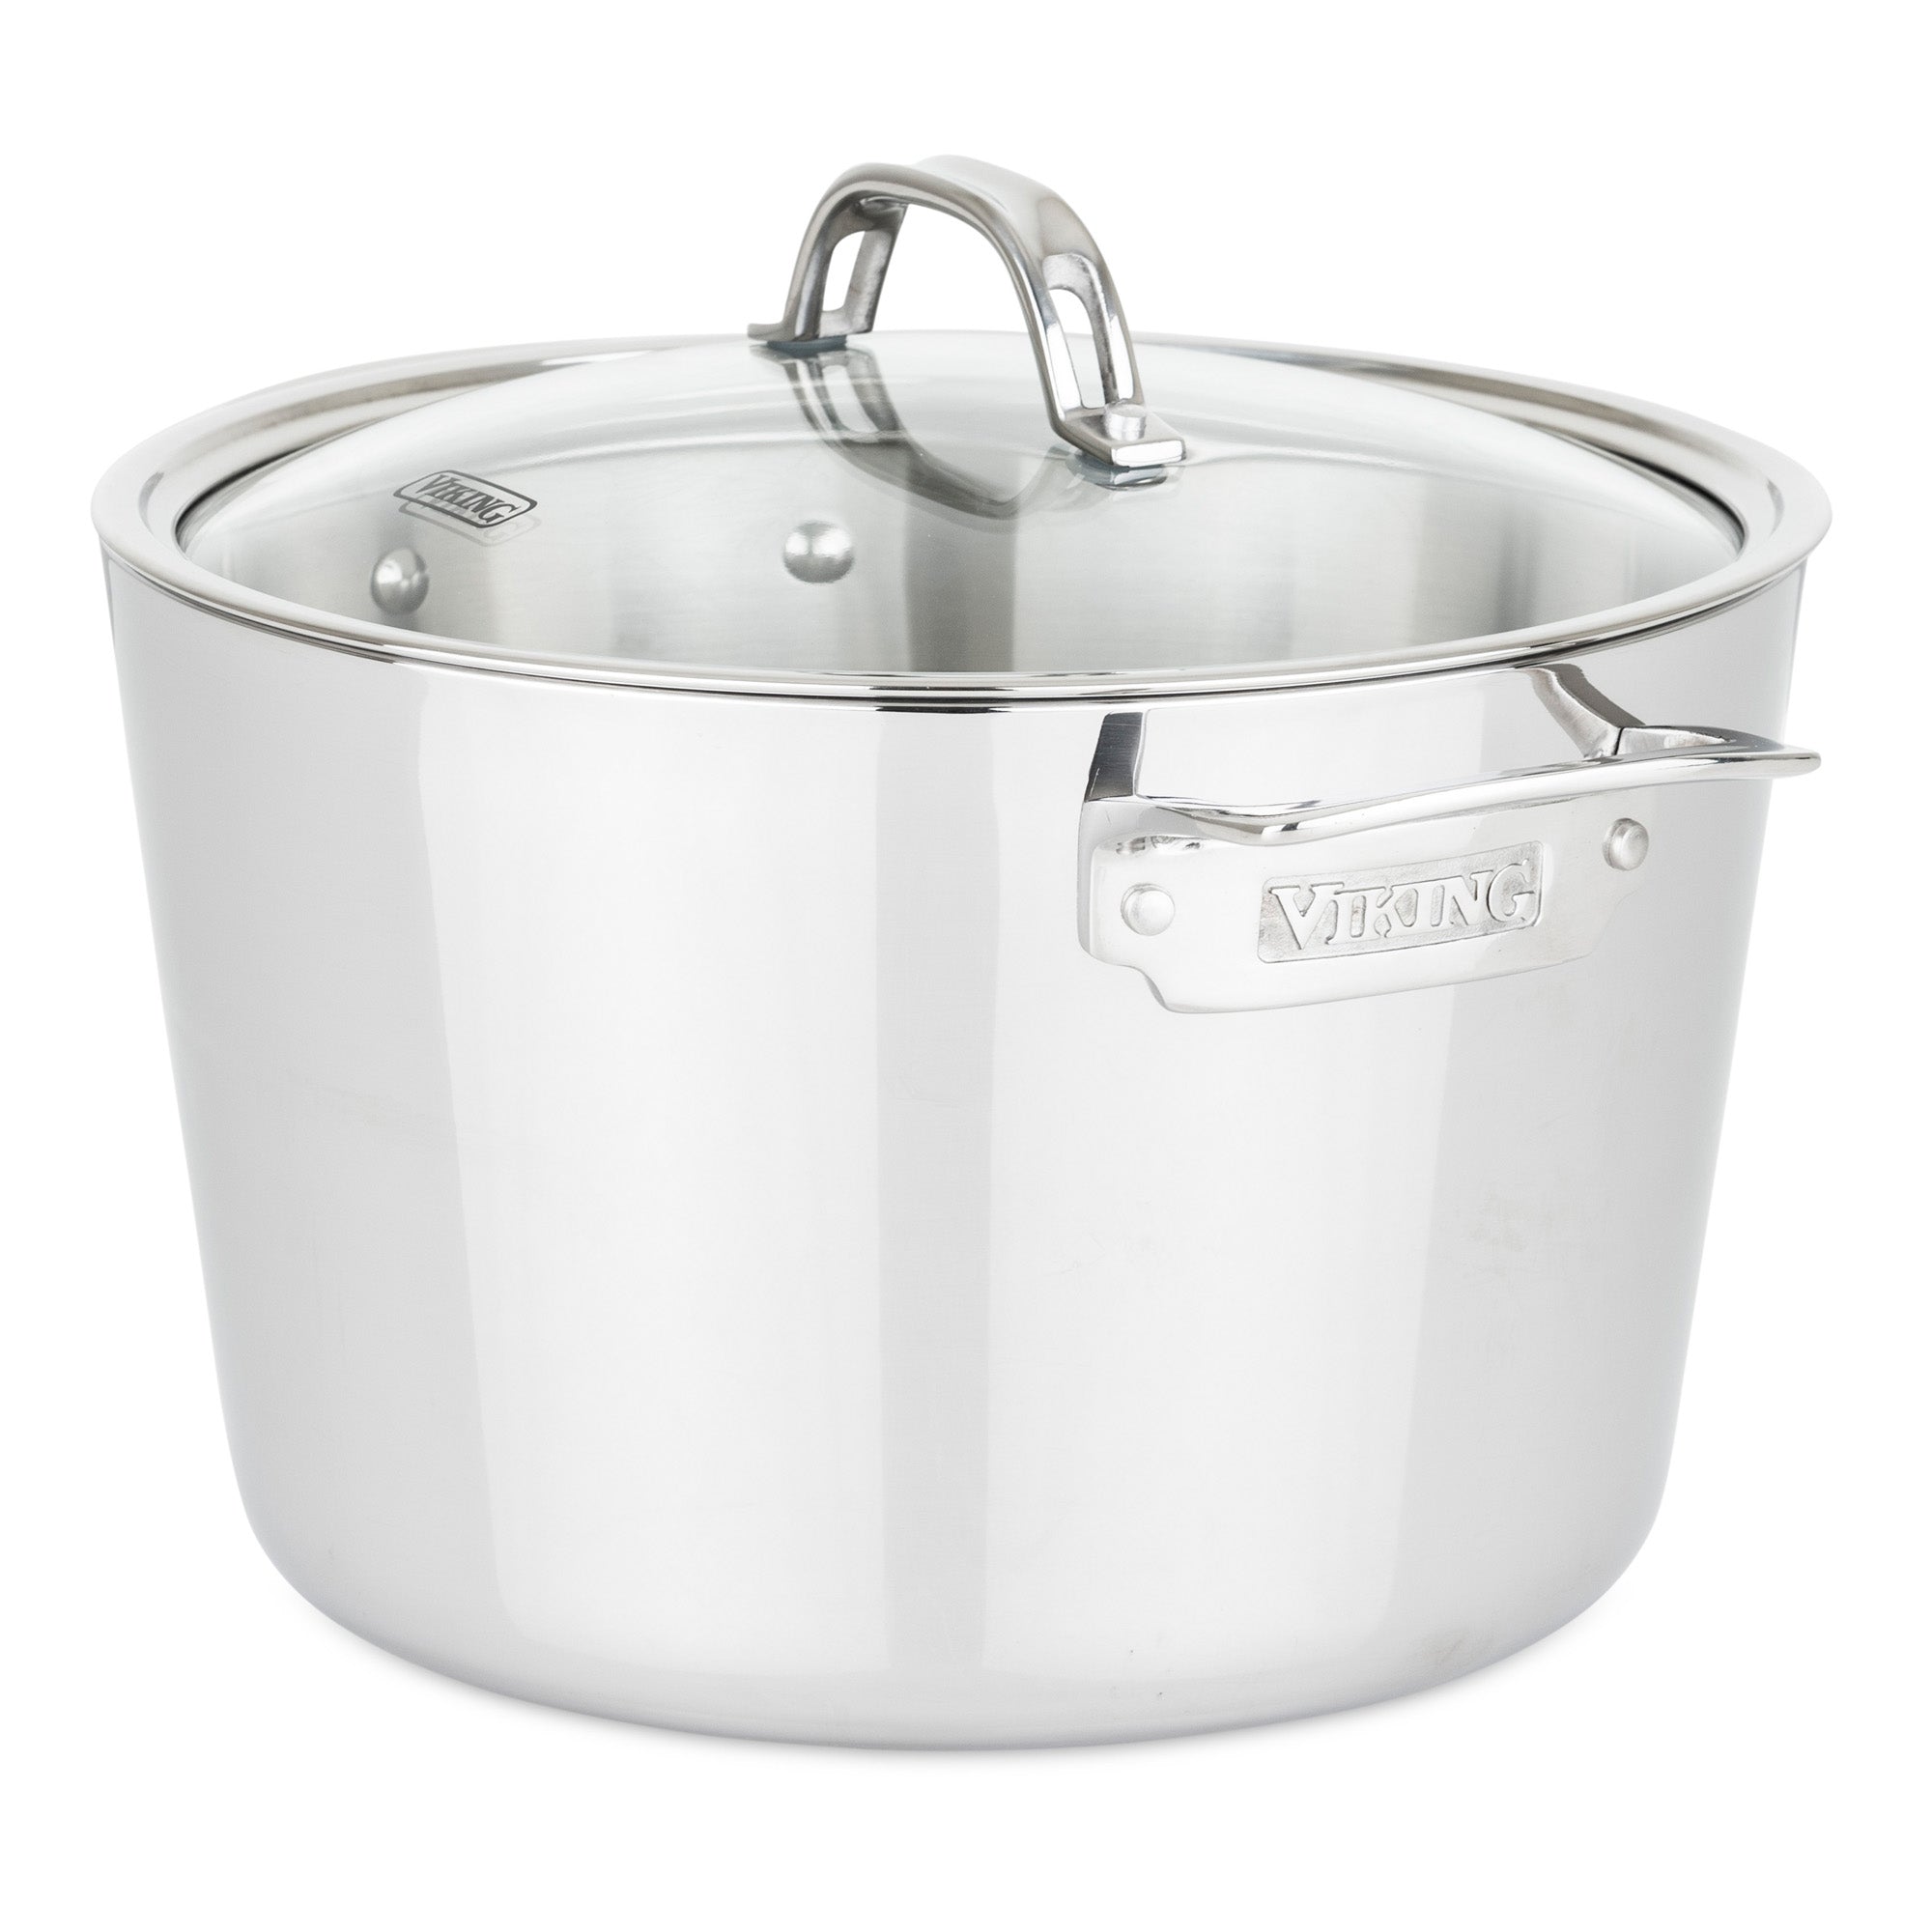 American Kitchen Cookware - 8 Qt. Covered Stock Pot / Stainless Steel